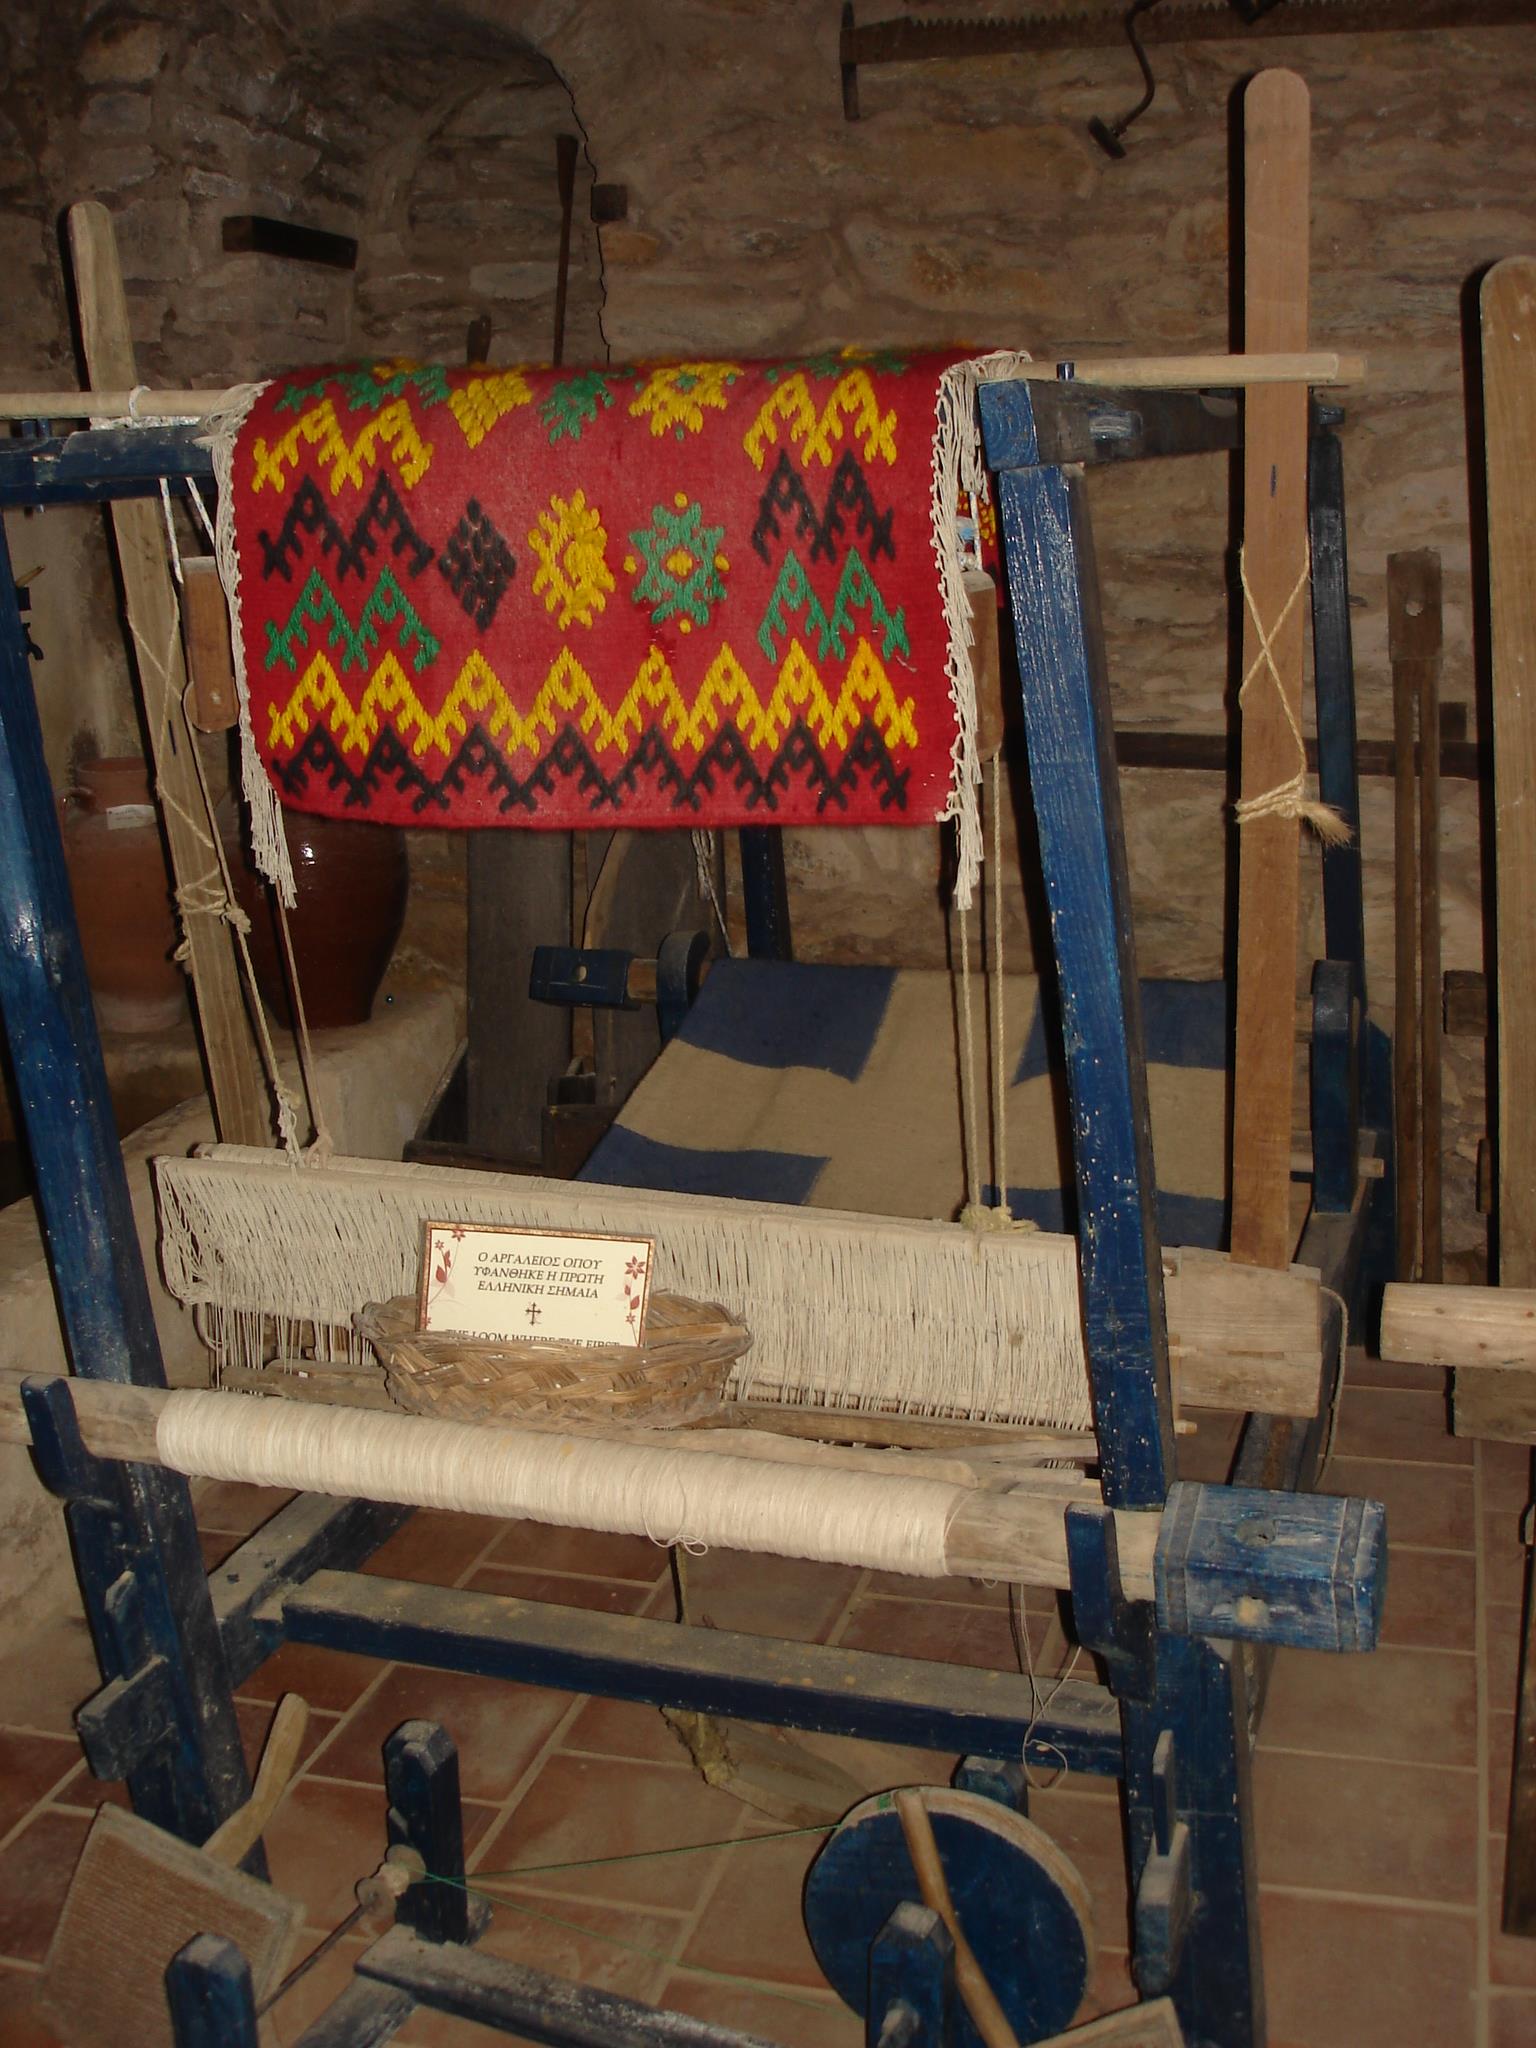 The loom, on which the fist Greek flag, symbol of the Greek Revolution for Independence, was wooven. It was a flag that has a white cross on a sky blue background. MONI EVANGELISTRIAS (Monastery) SKIATHOS